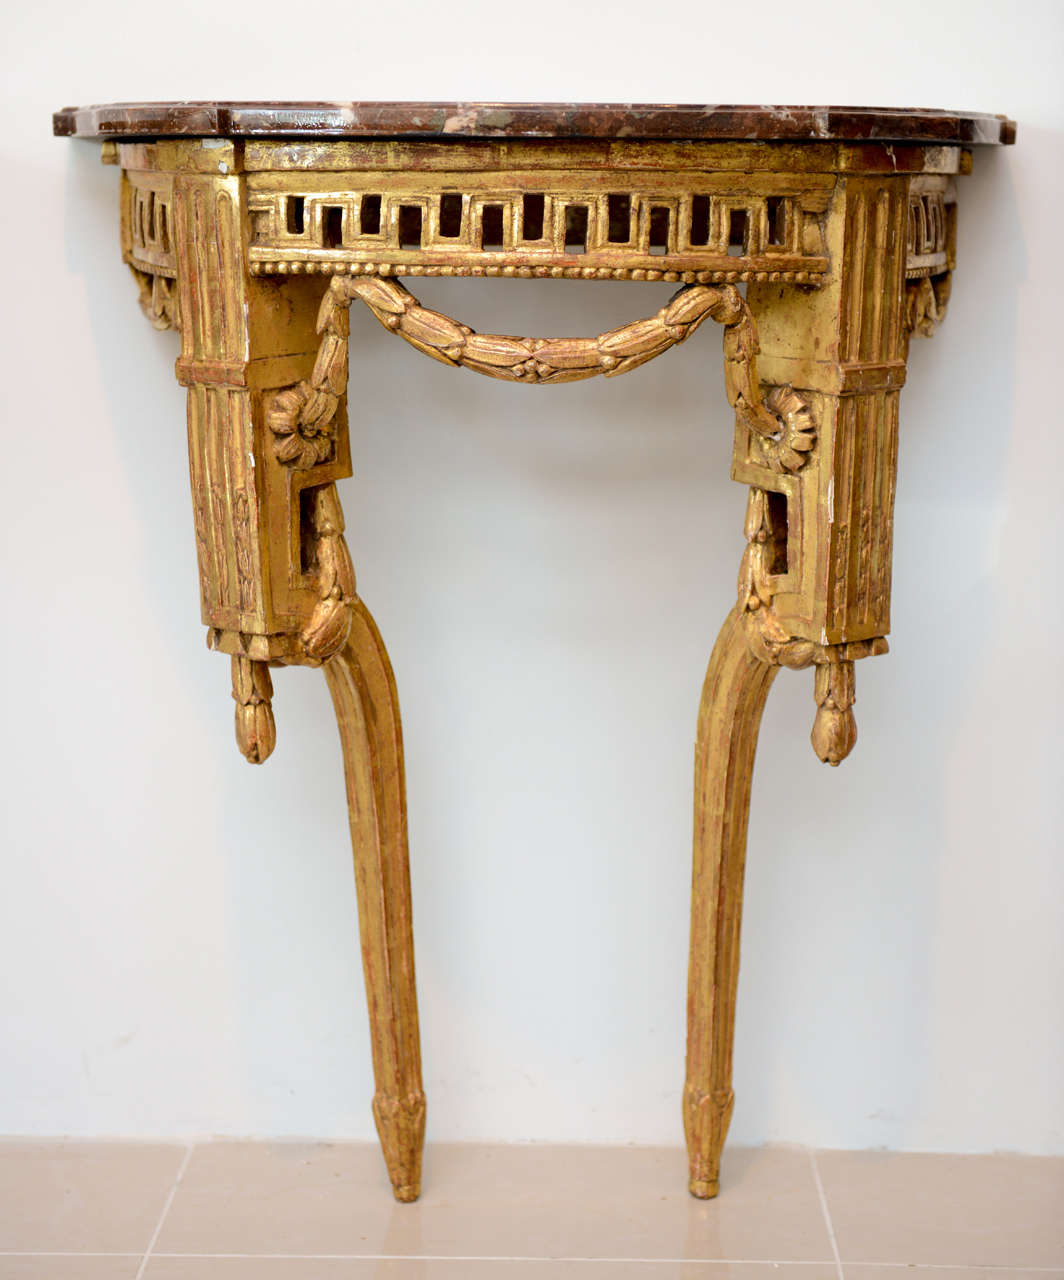 Neoclassical Pair of Fine Italian Neoclassic Giltwood Console Tables, Late 18th Century